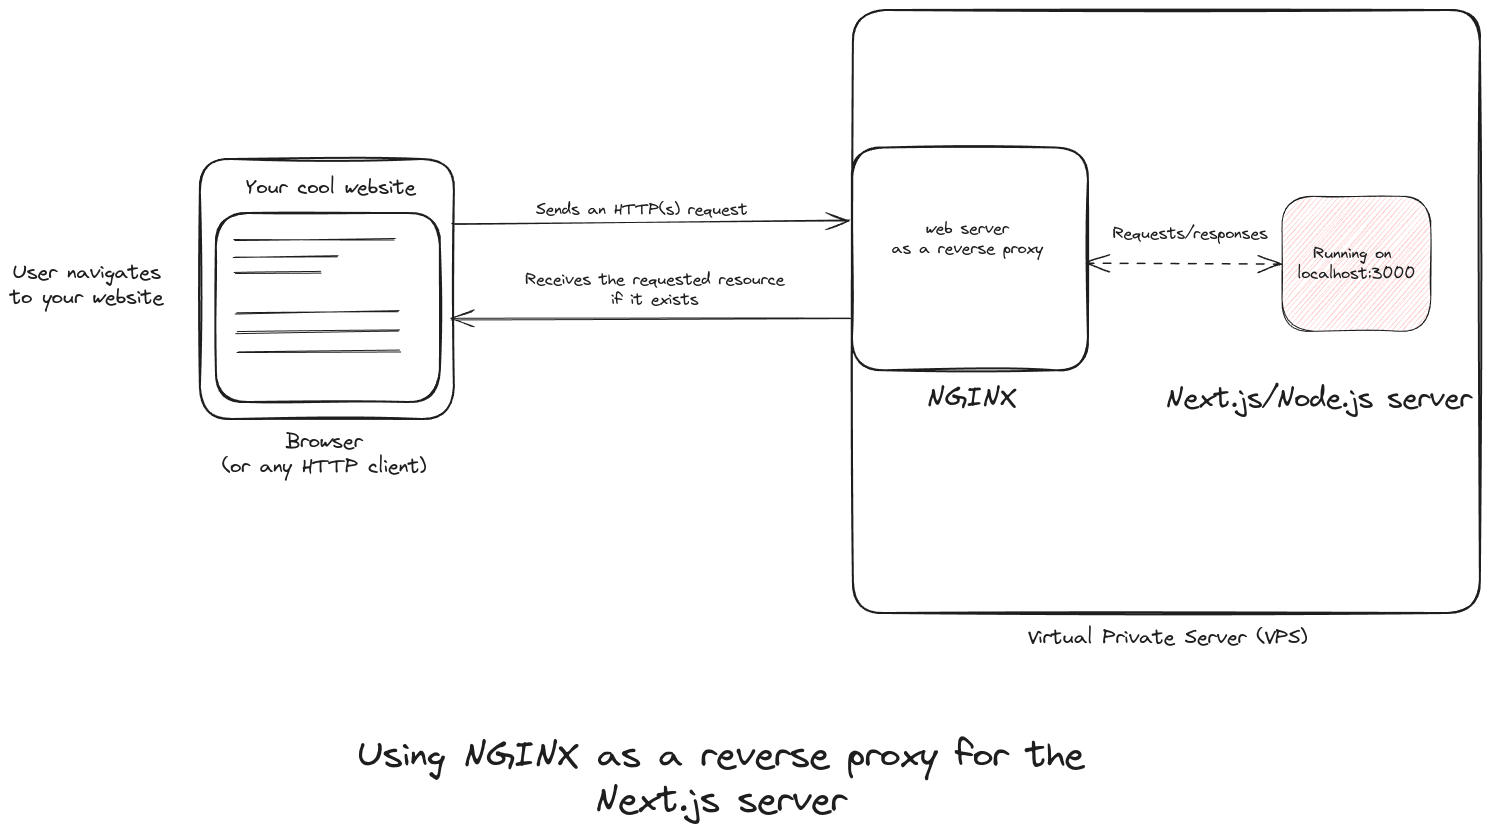 Using NGINX as a reverse proxy for the Next.js server